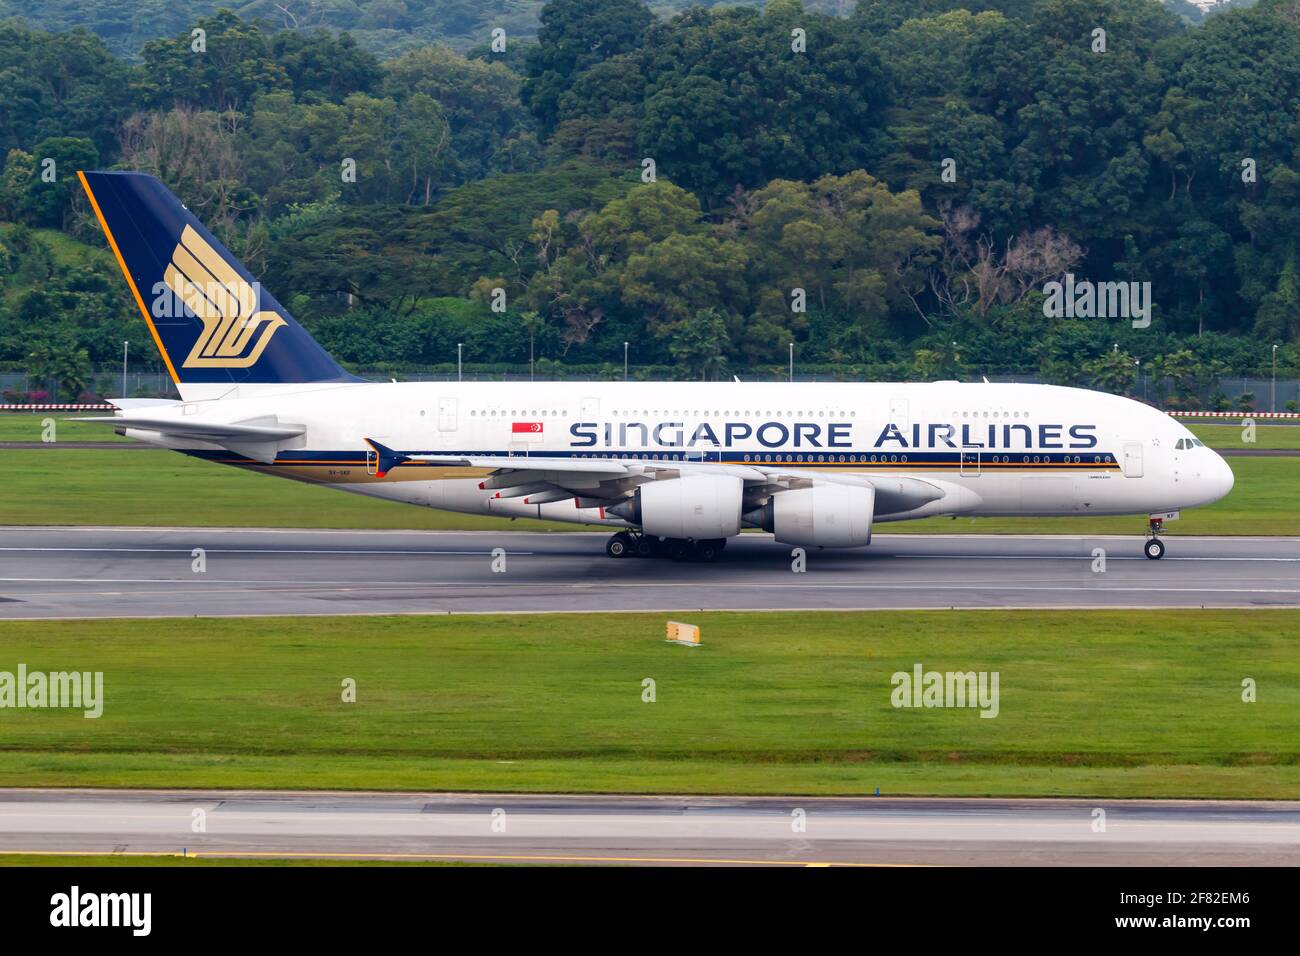 Changi, Singapore – January 29, 2018: Singapore Airlines Airbus A380 airplane at Changi airport (SIN) in Singapore. Airbus is a European aircraft manu Stock Photo